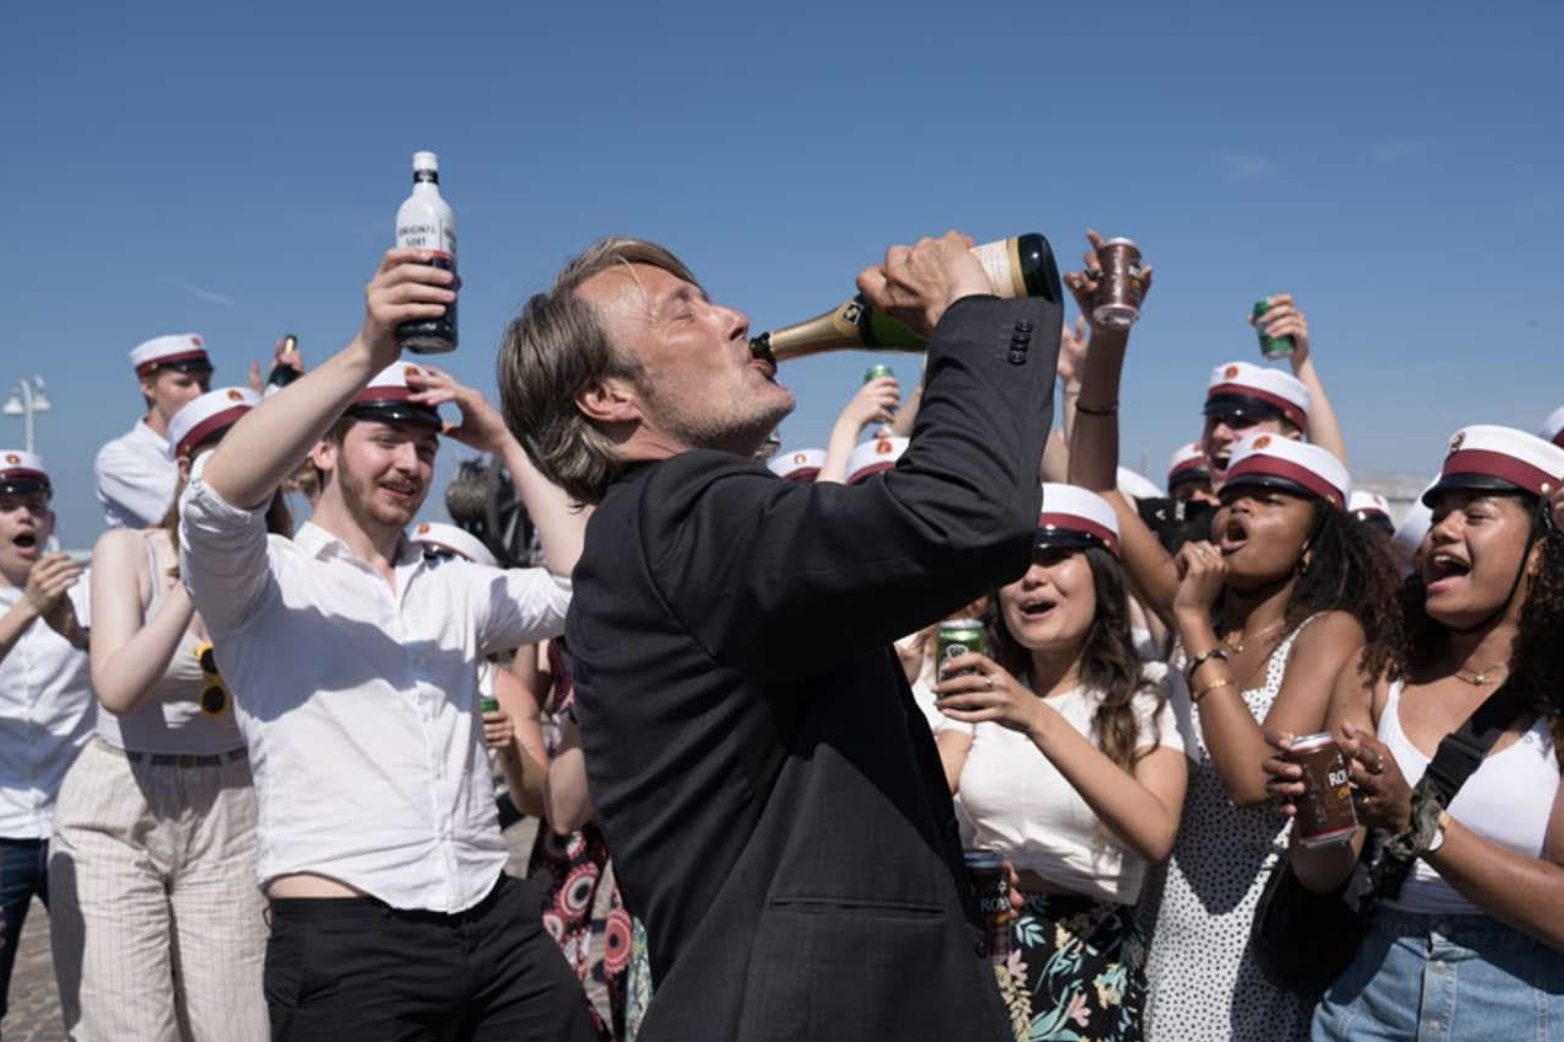 A man drinks a bottle of champagne with people looking on behind him.